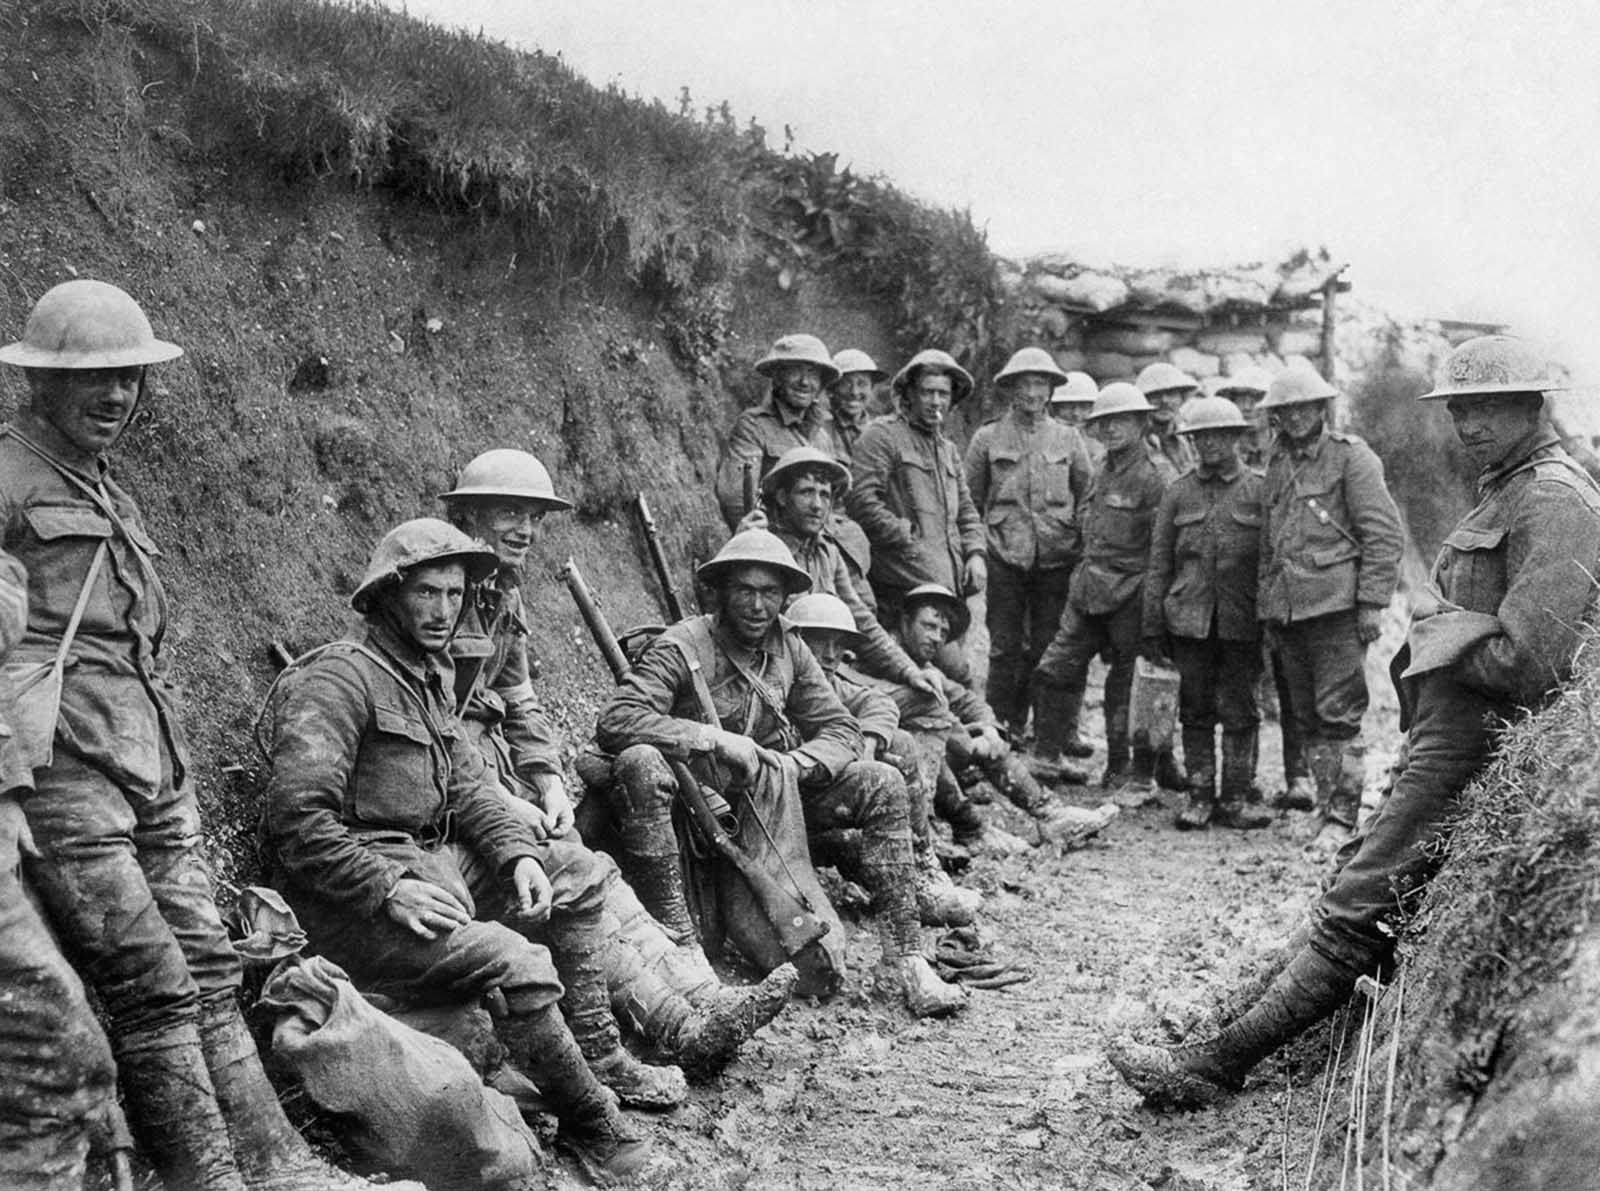 Men of the Royal Irish Rifles rest during the opening hours of the Battle of the Somme. July 1, 1916.